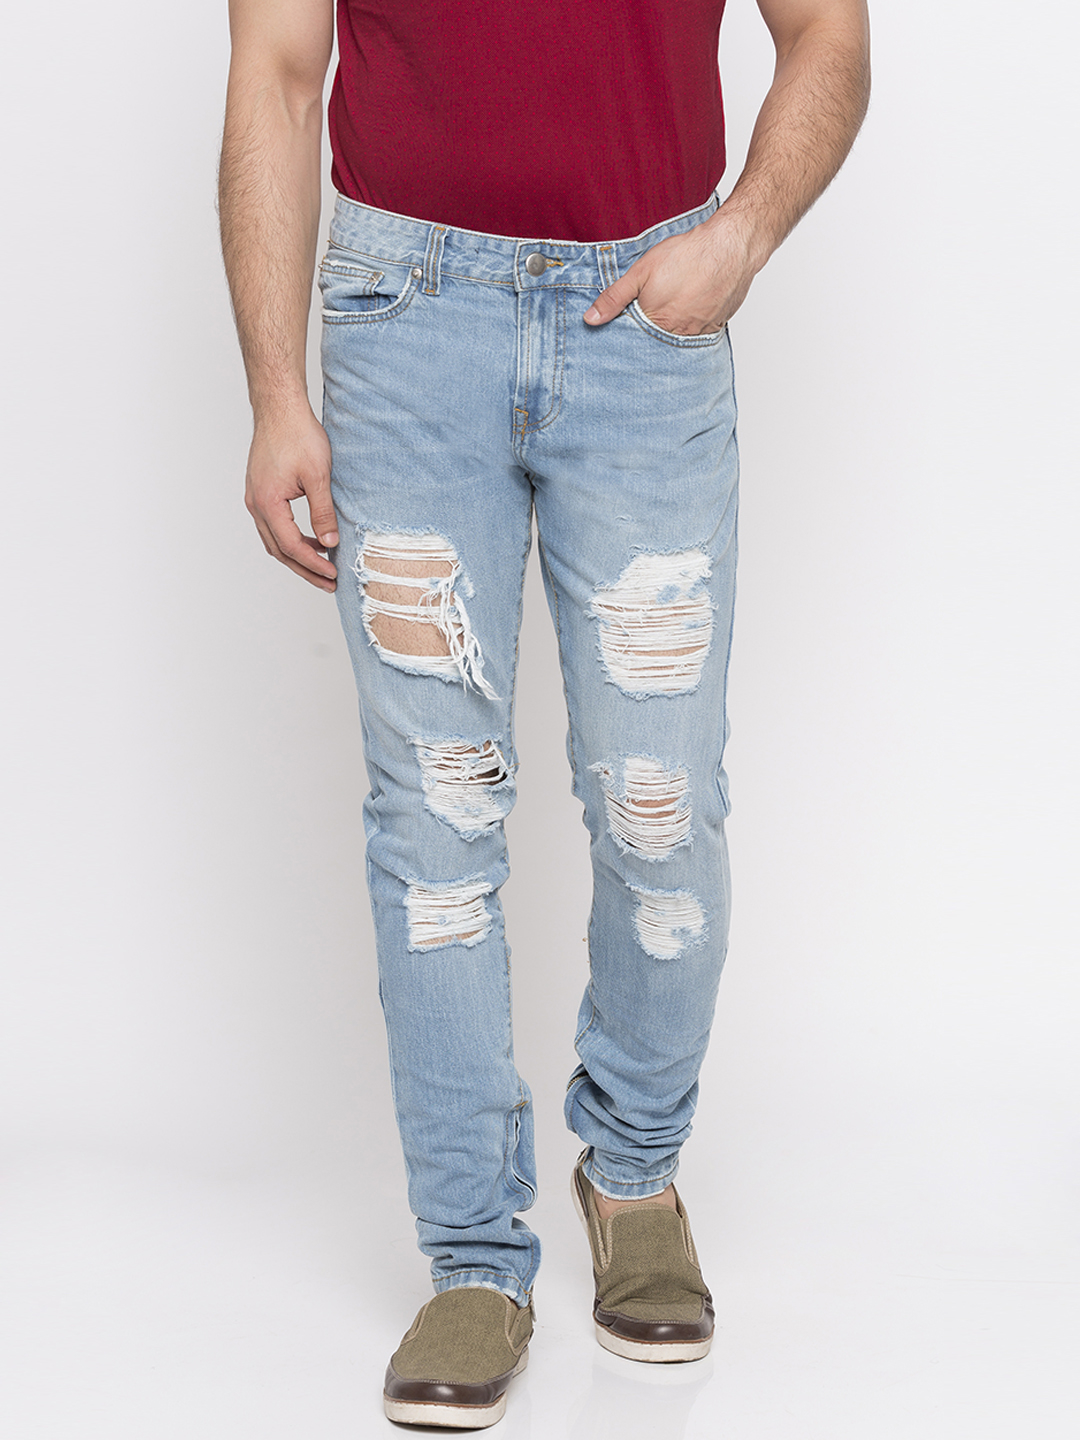 Types Of Jeans For Men